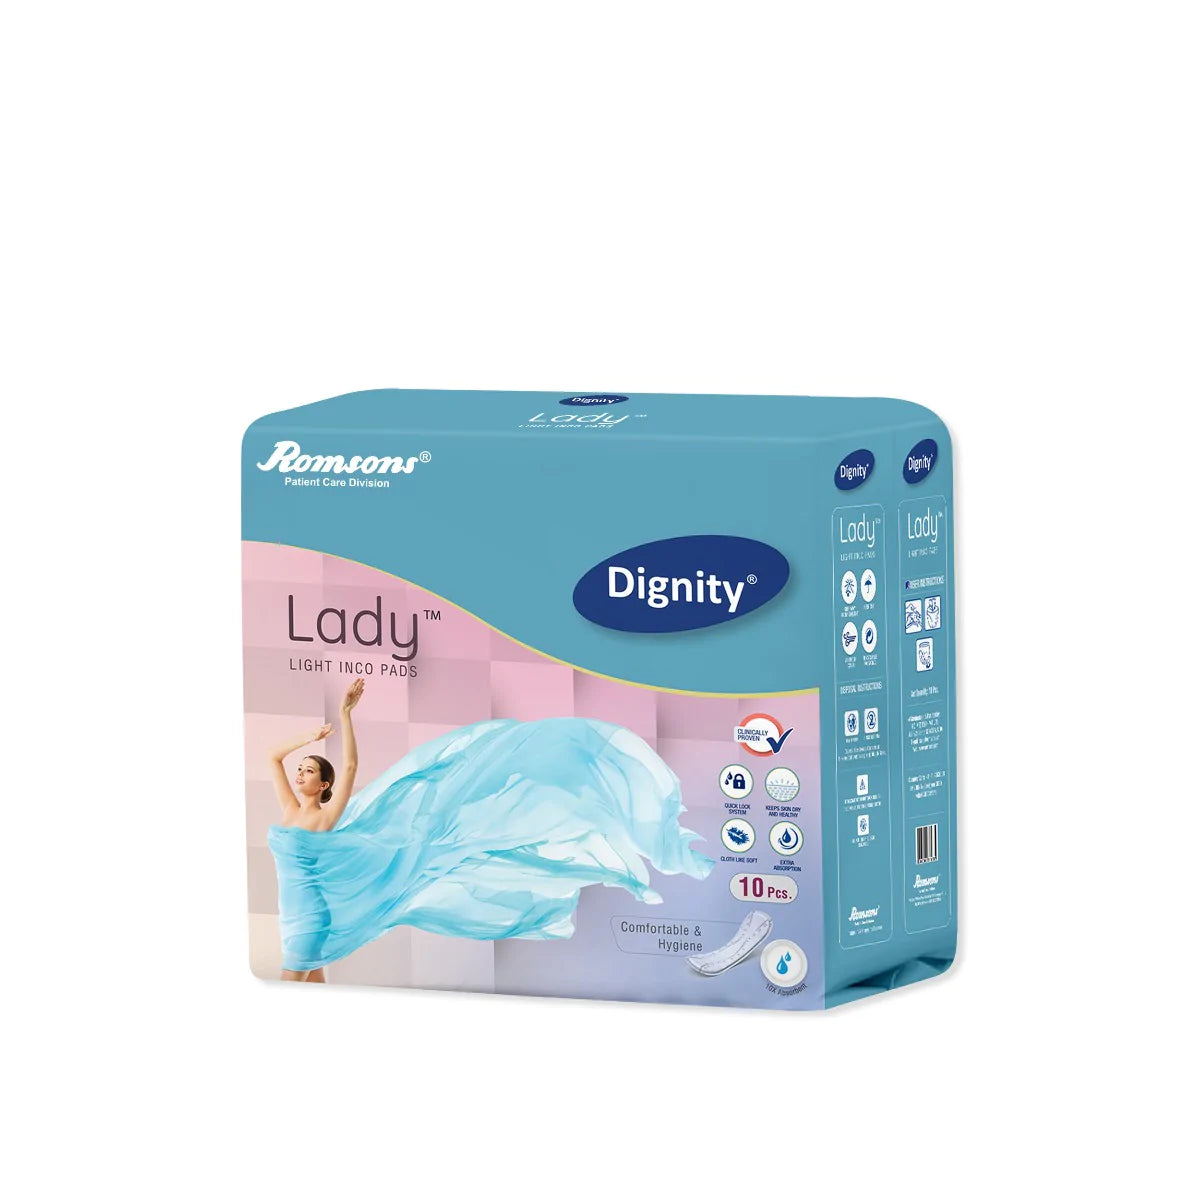 Dignity Lady Light Incontinence Pads (10 Pcs/Pack)